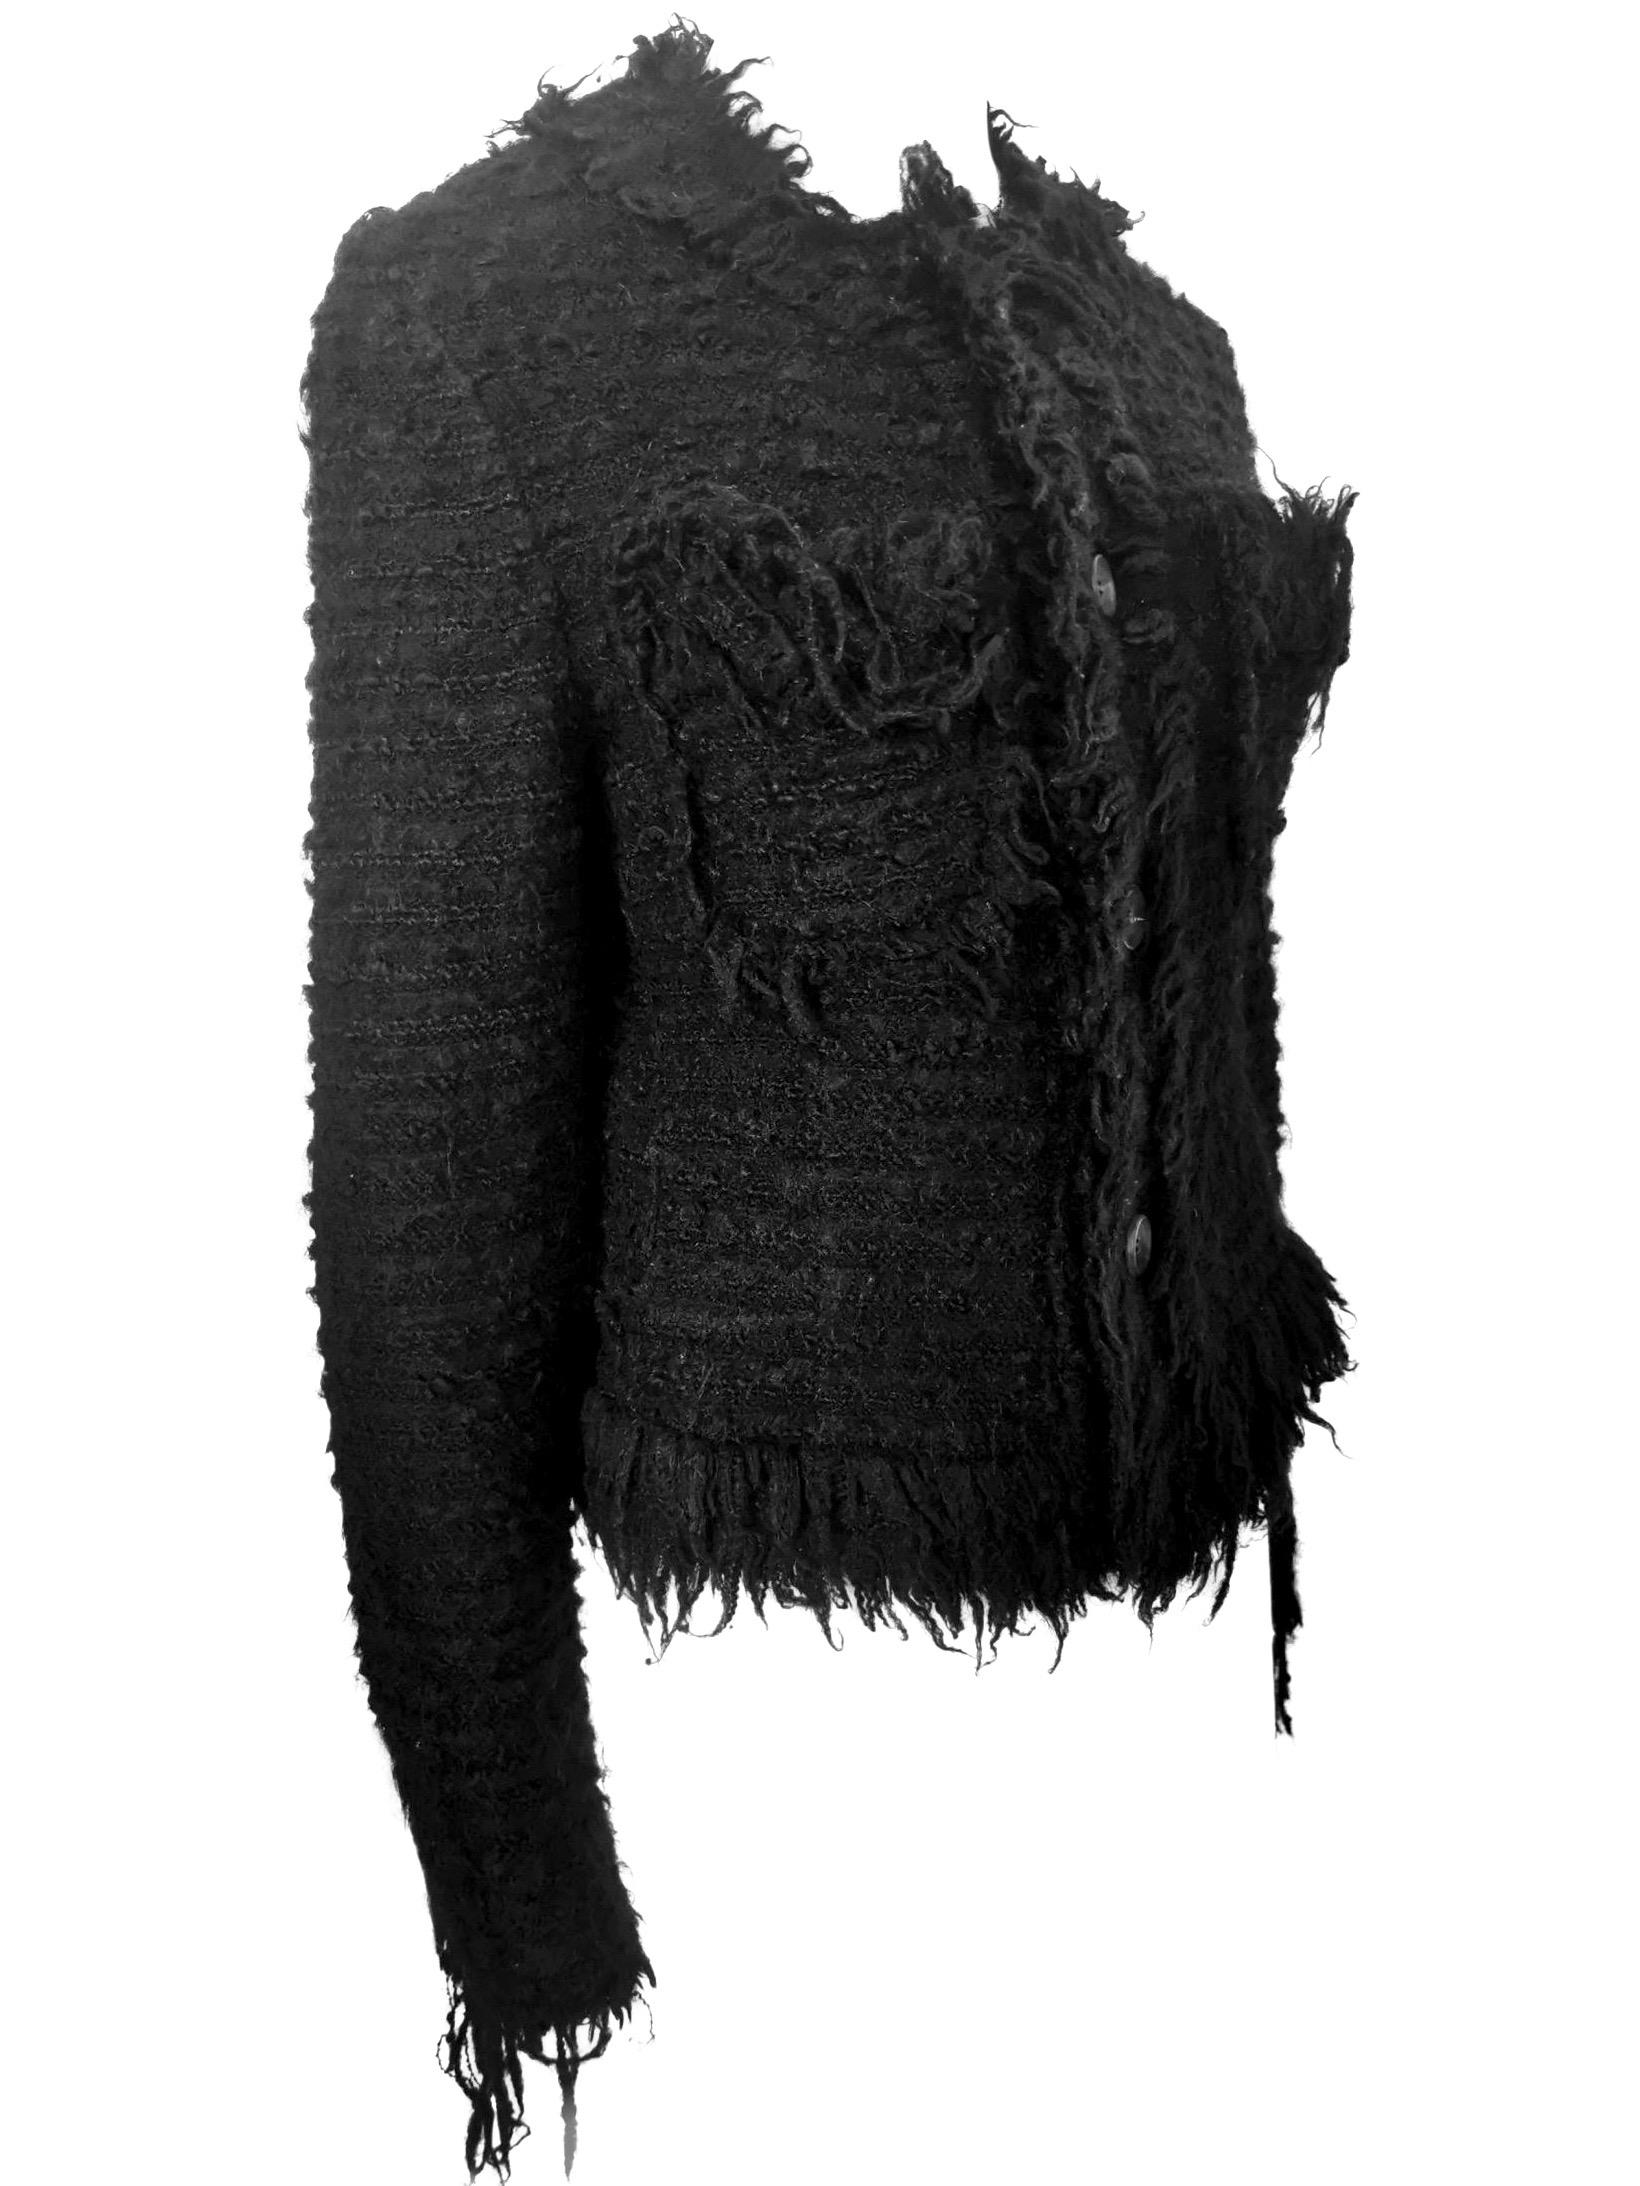 Comme des Garcons Junya Watanabe Cropped Chanel Style Fringed Jacket AD 2003 6